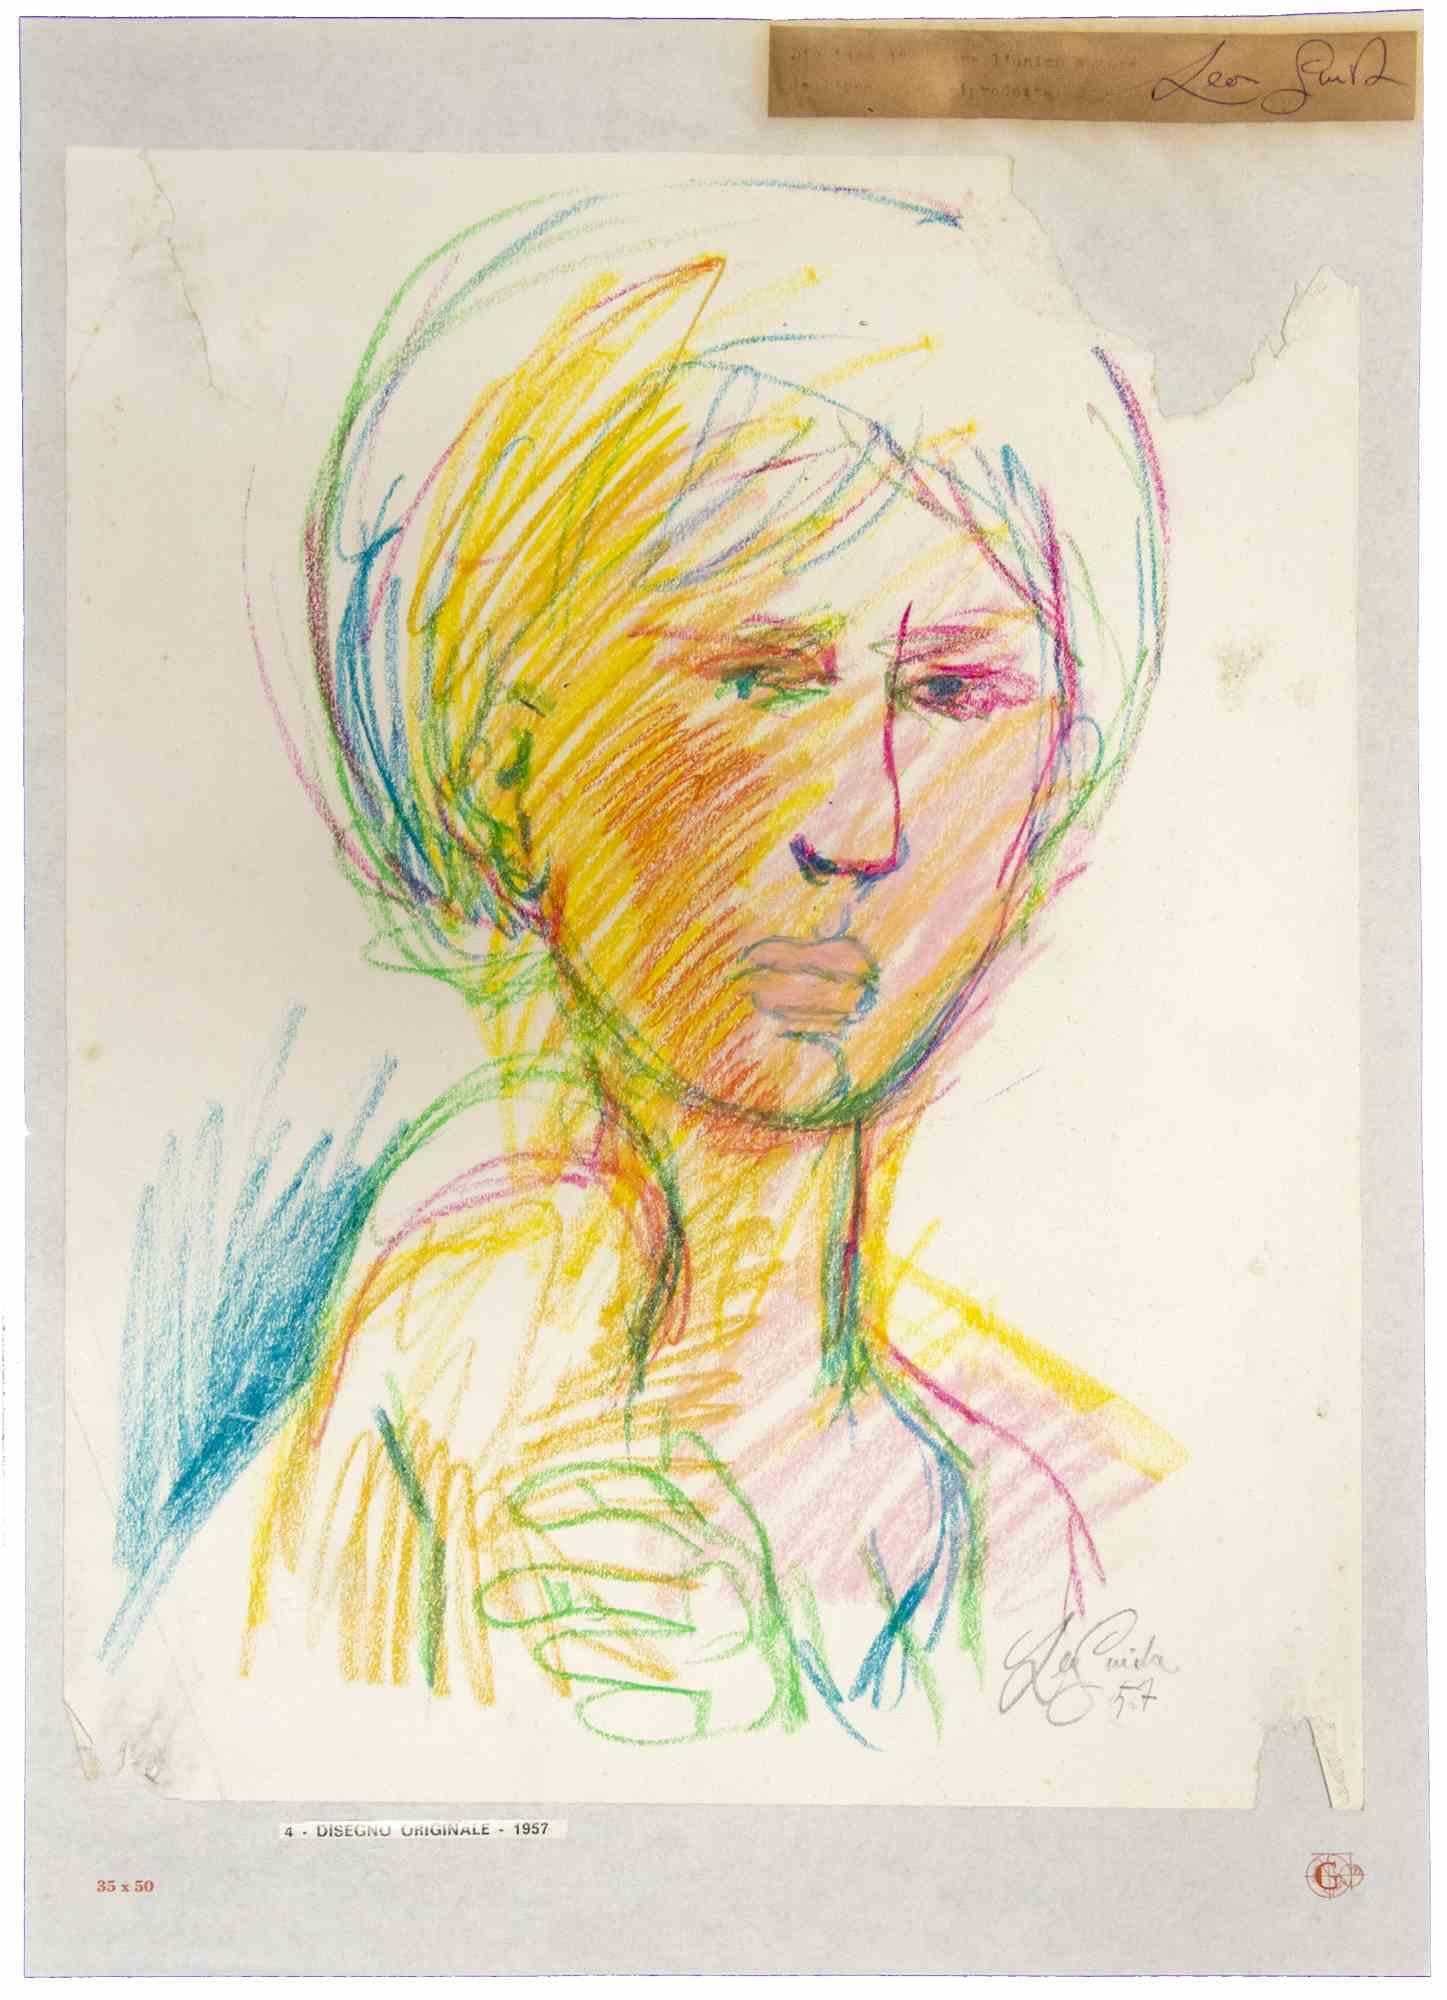 Portrait is an original artwork realized  in 1957 by the italian Contemporary artist  Leo Guida  (1992 - 2017).

Original pastels drawing on ivory-colored paper, glued on cardboard (50,5 x 35 cm).

Hand-signed and dated on the lower margins. 

Good